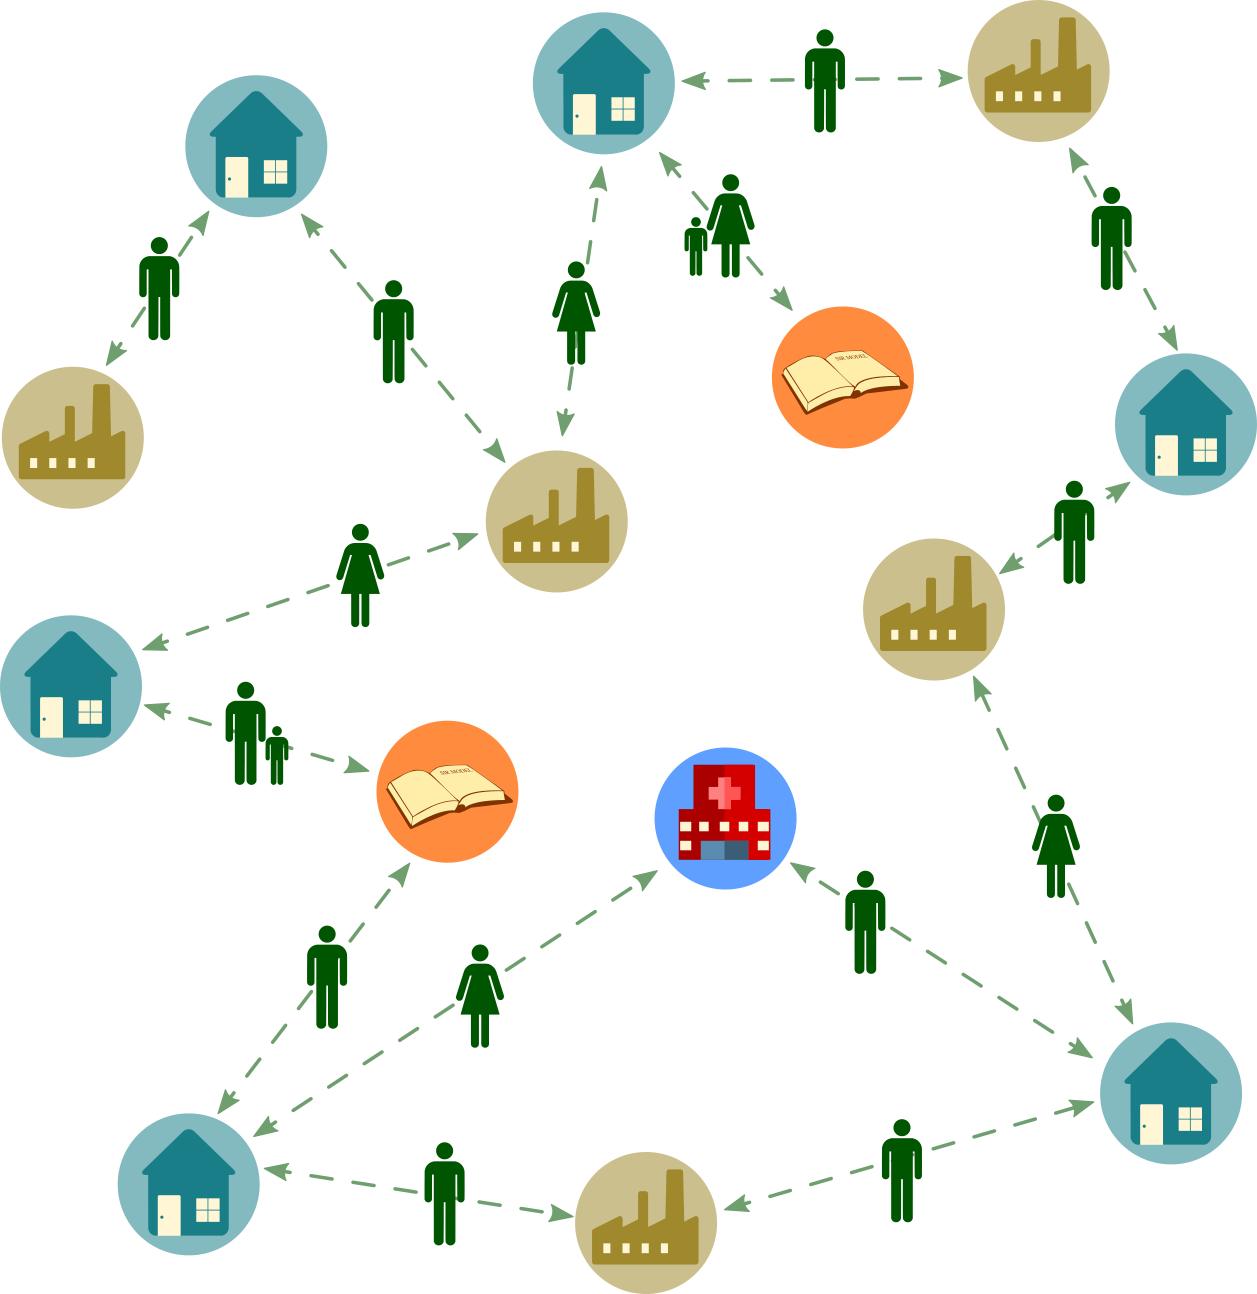 A schematic of a model network